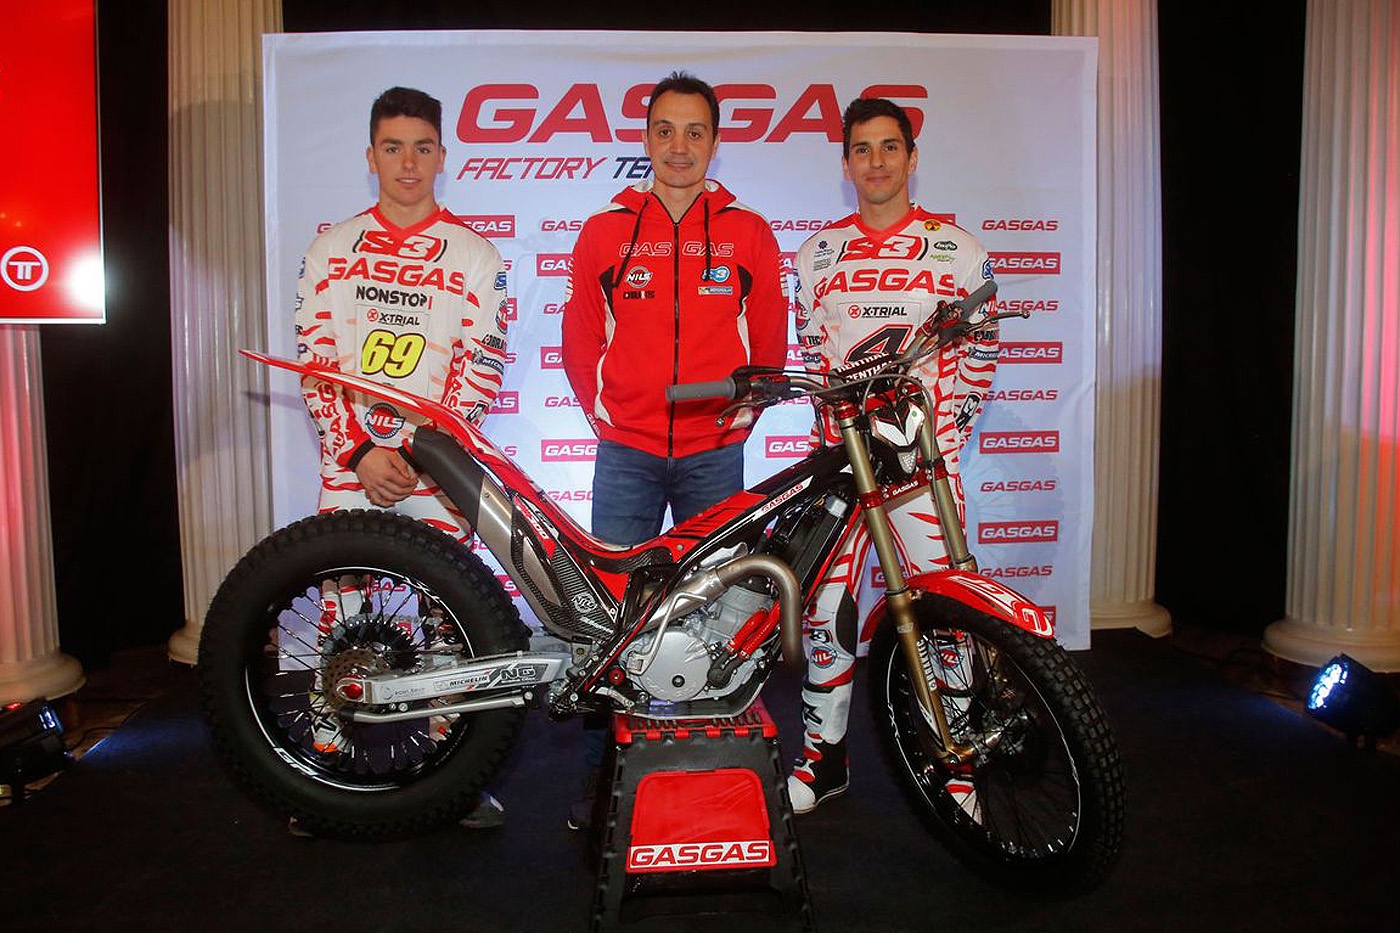 Gas Gas strengthens with Fajardo and Busto